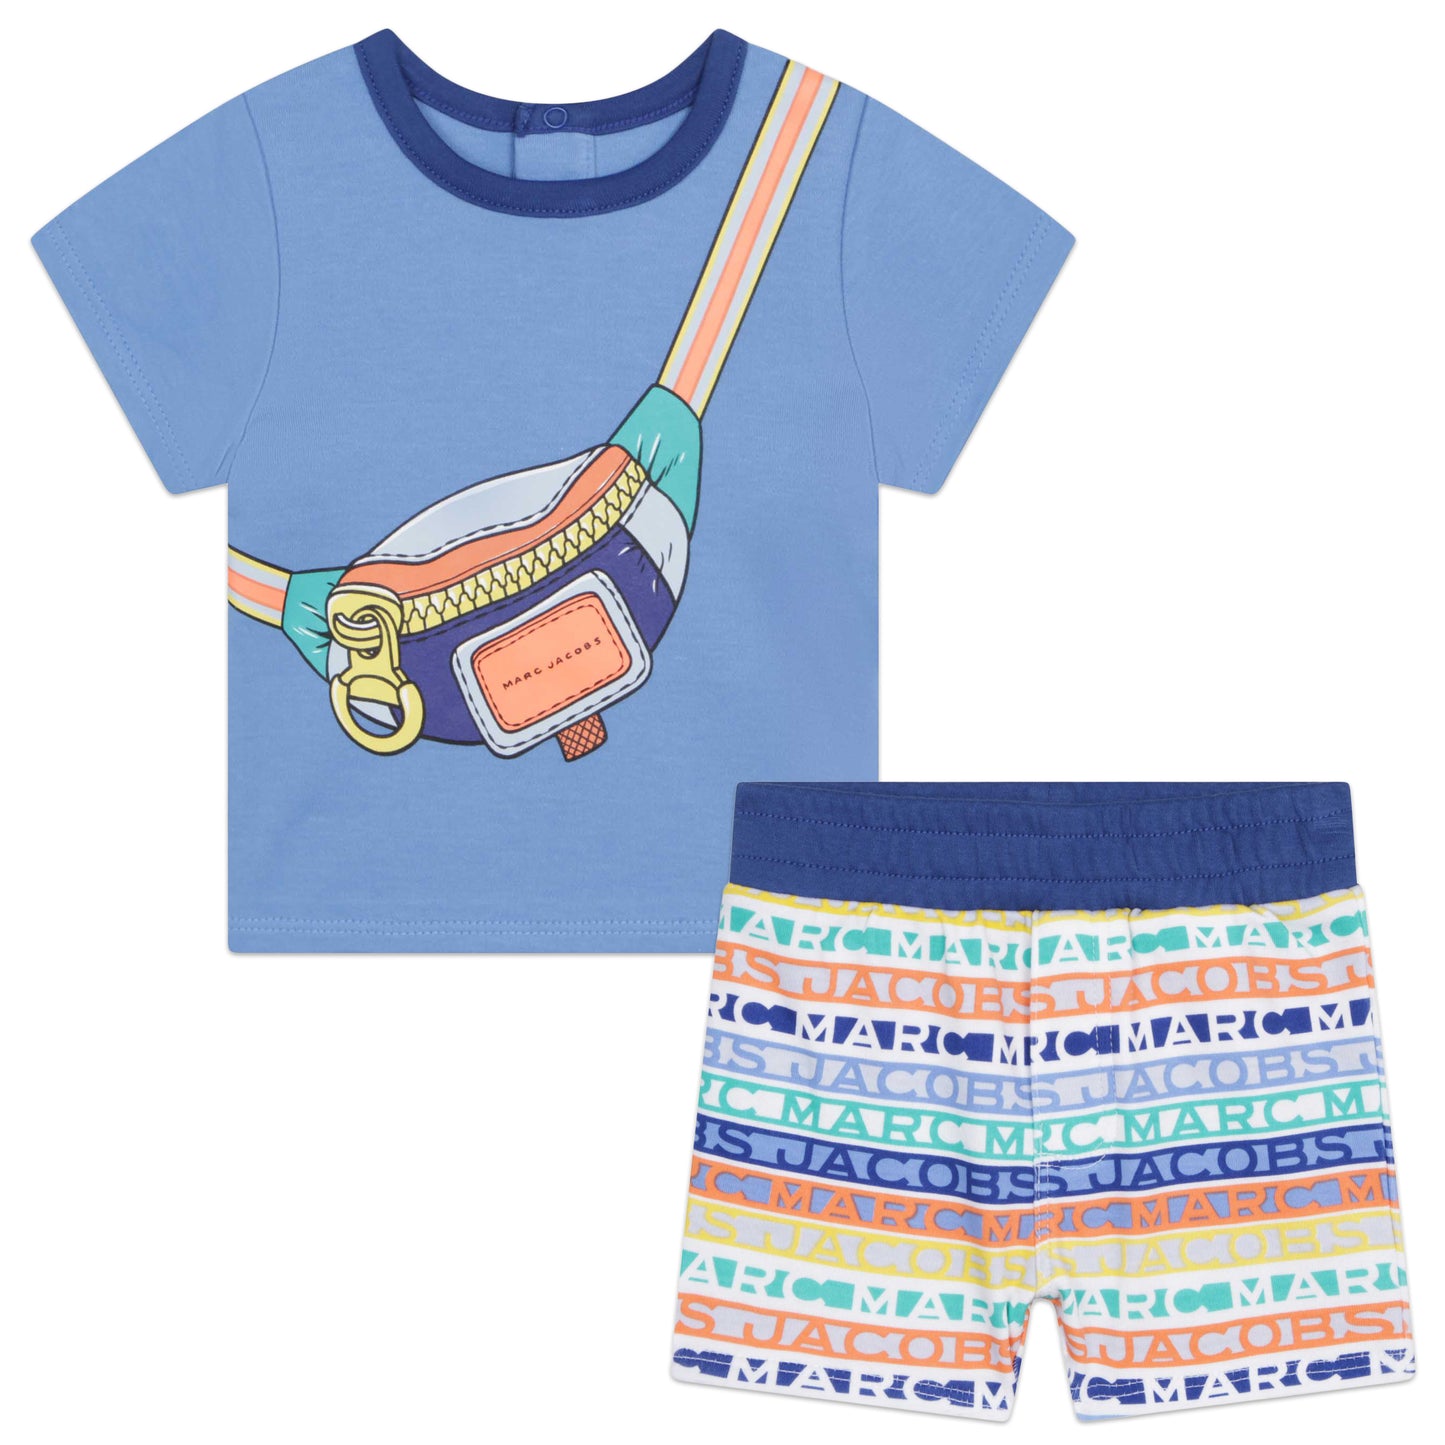 Little Marc Jacobs Fanny Pack Tee Shirt & Shorts 2Pc Outfit